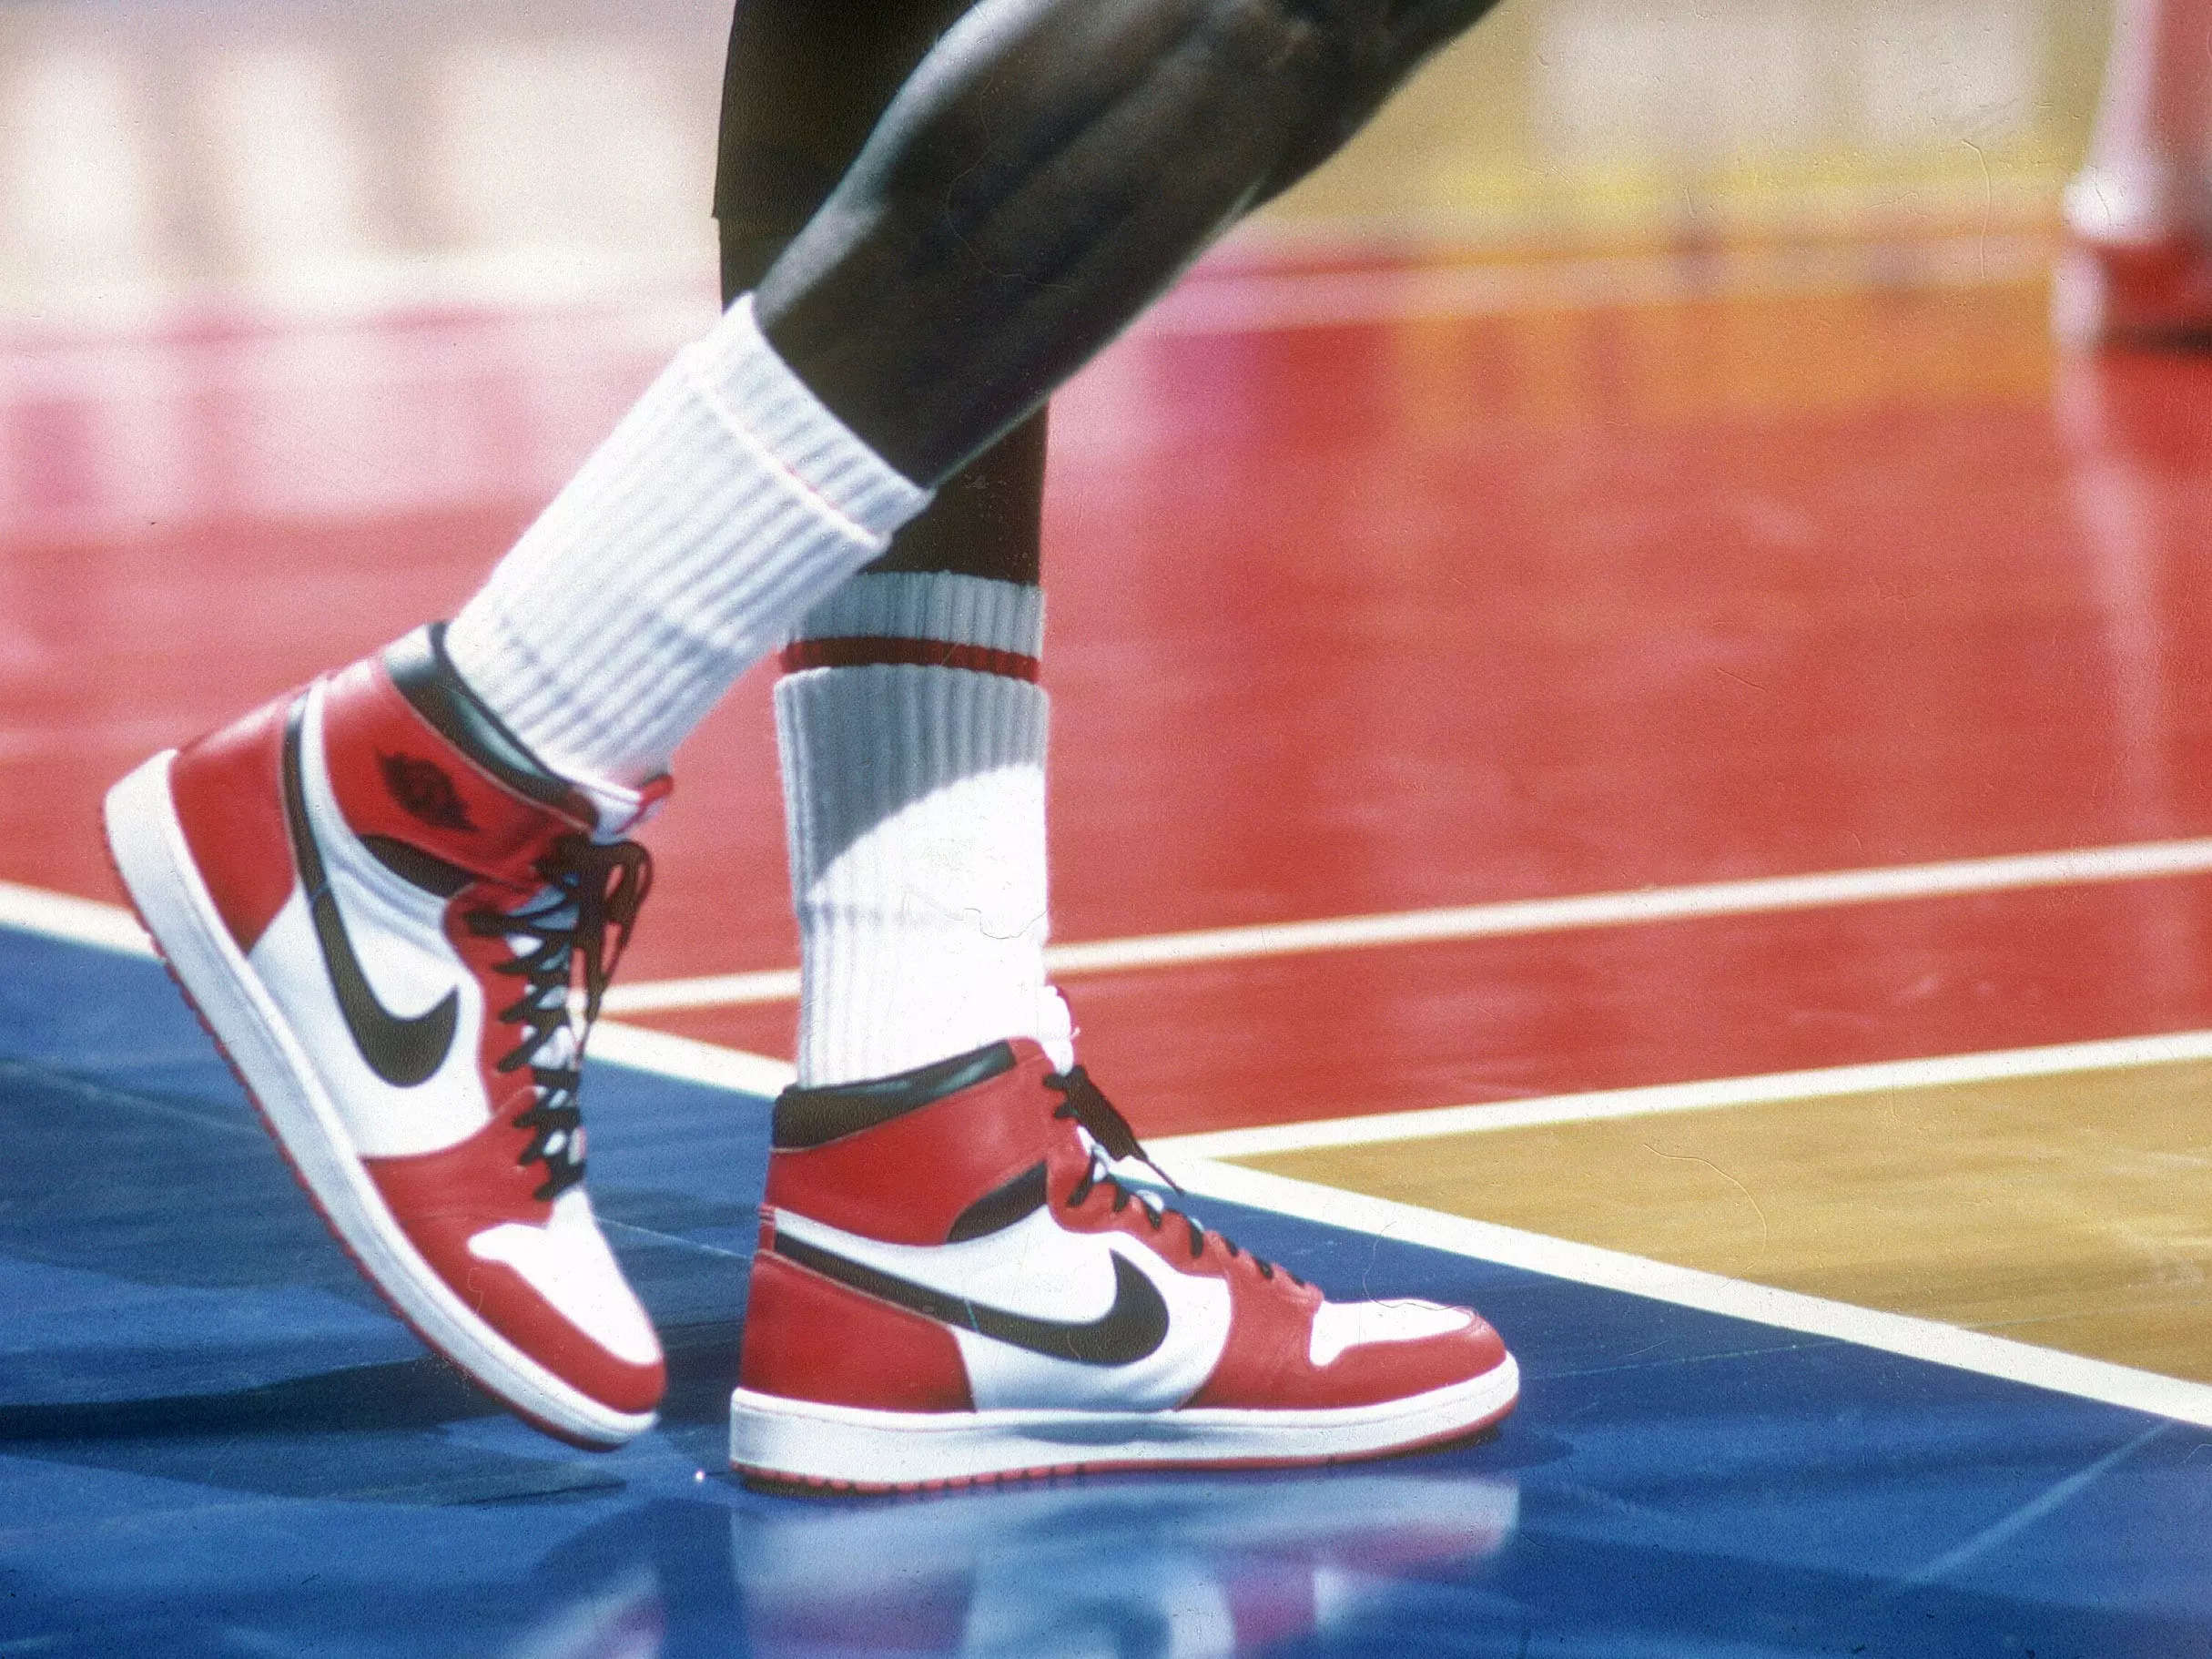 How Nike's Air Jordan 1 Became the Most Prized Lifestyle Sneaker